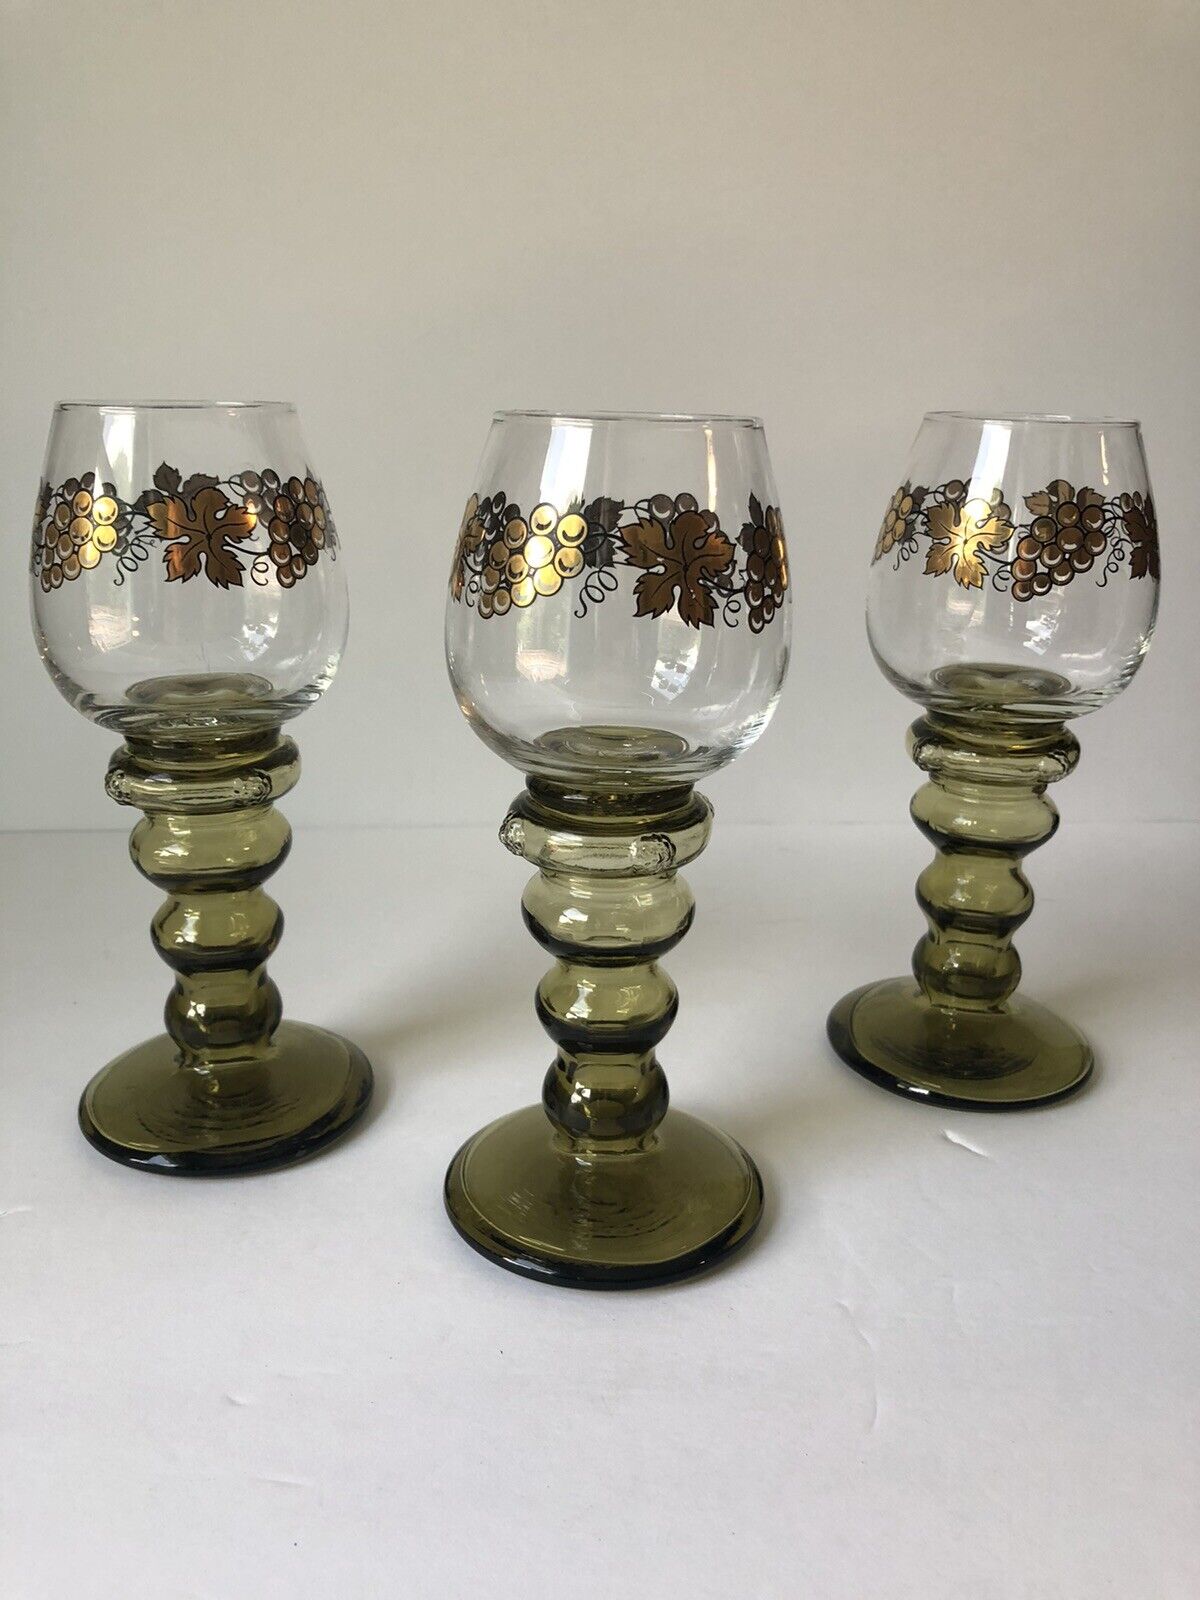 Vintage Roemer Rhine Hock Wine Glasses. Gold grapes and leaves. Set of 3